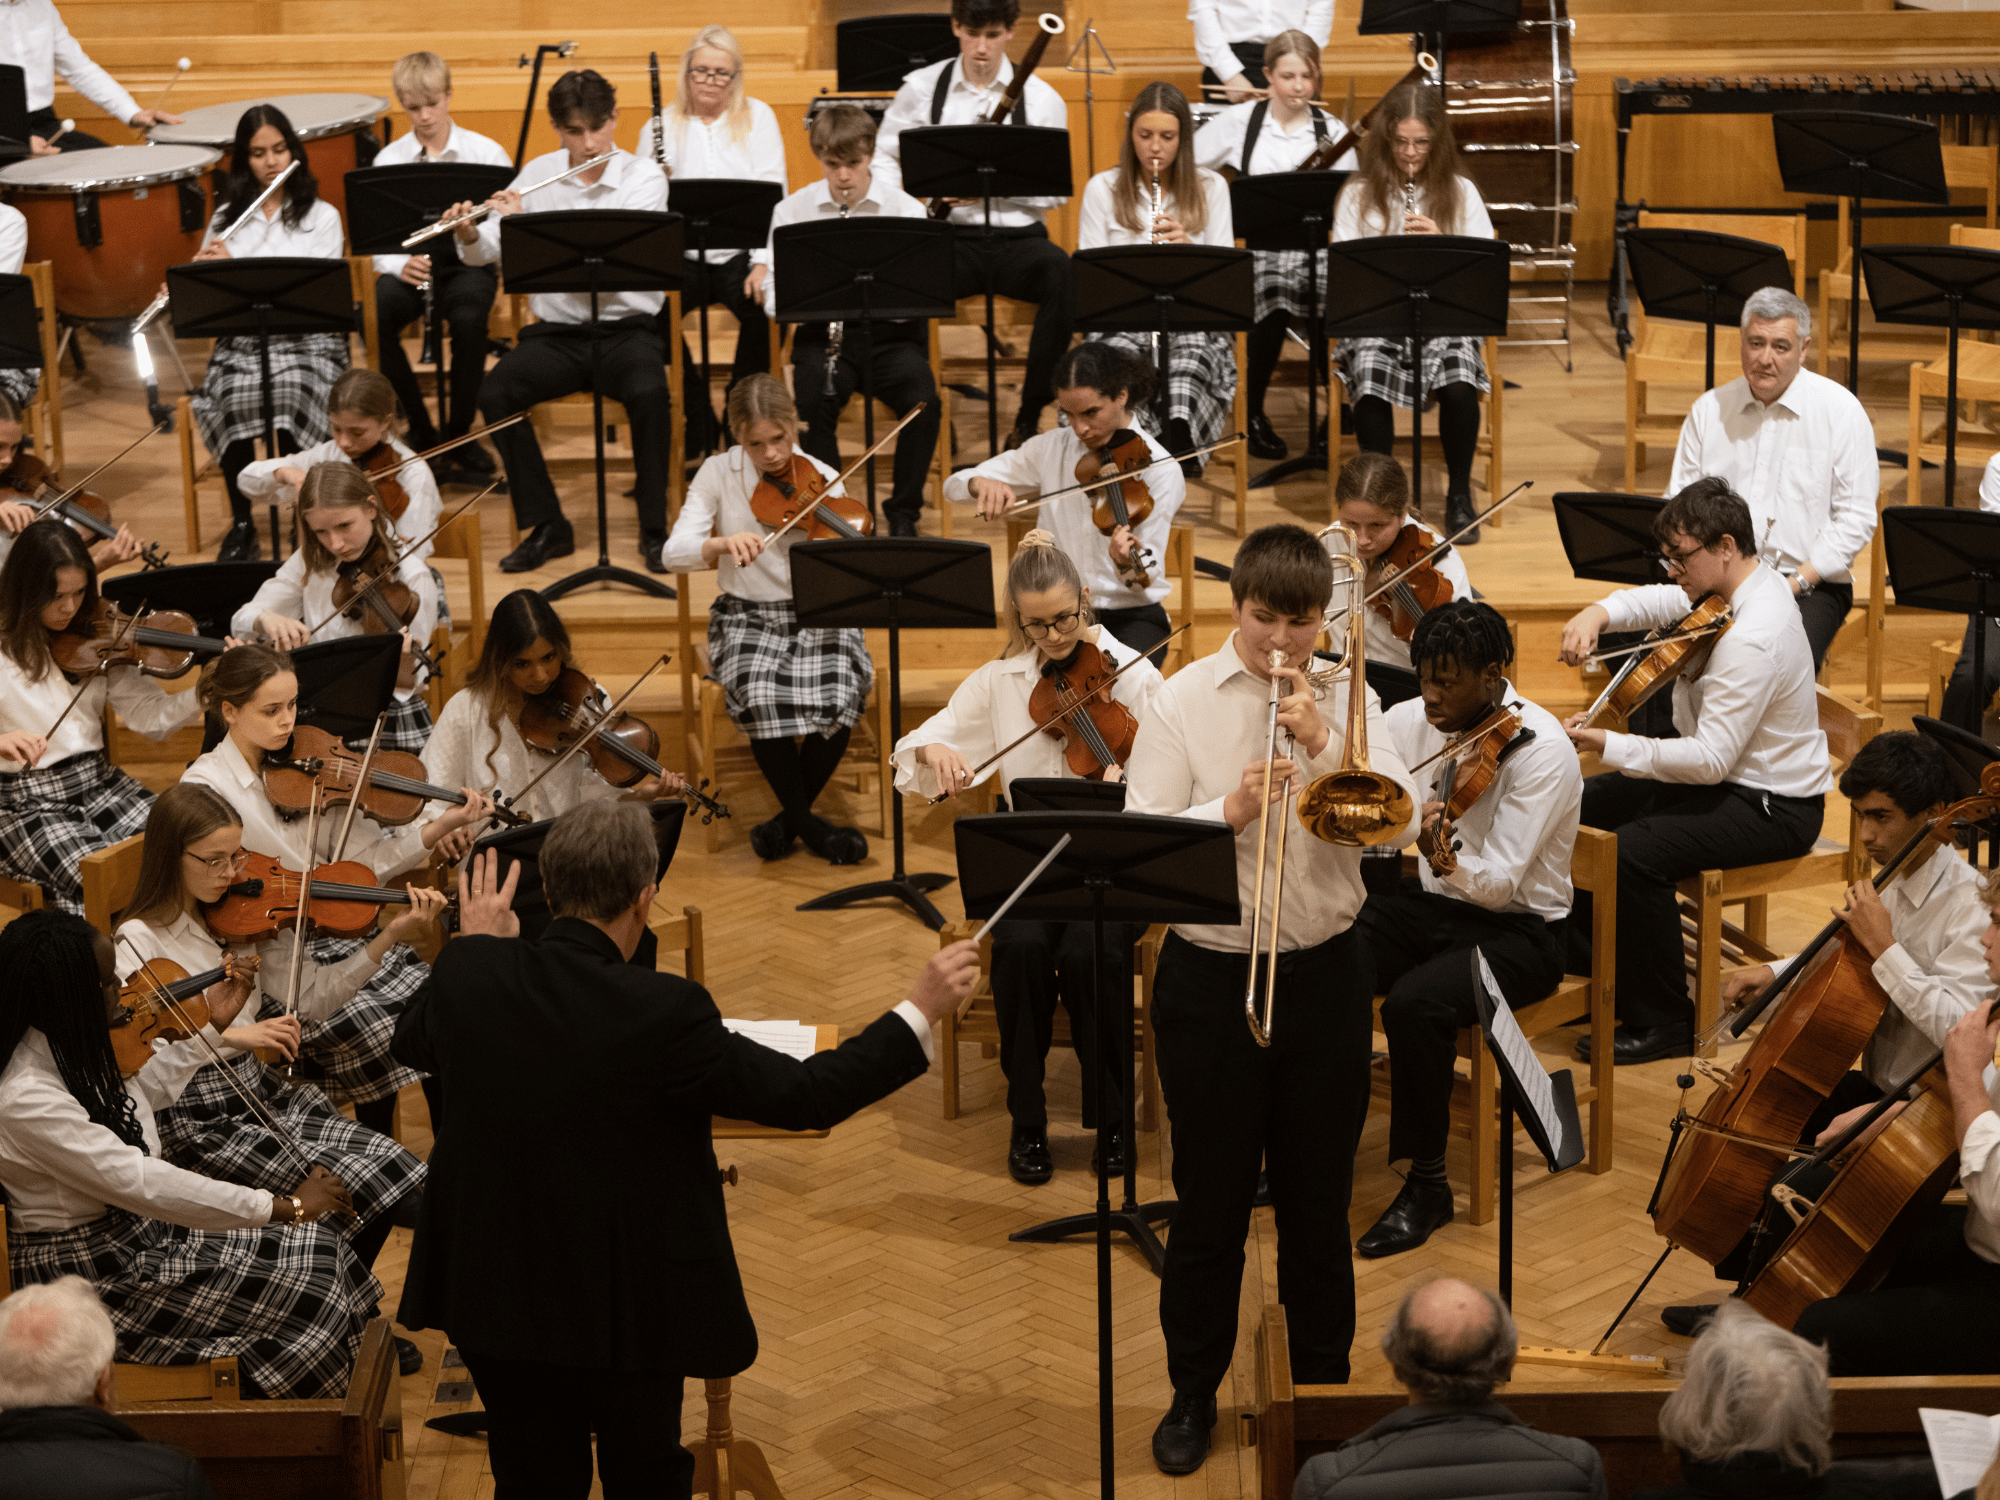 School orchestra play with solo trombone in concert